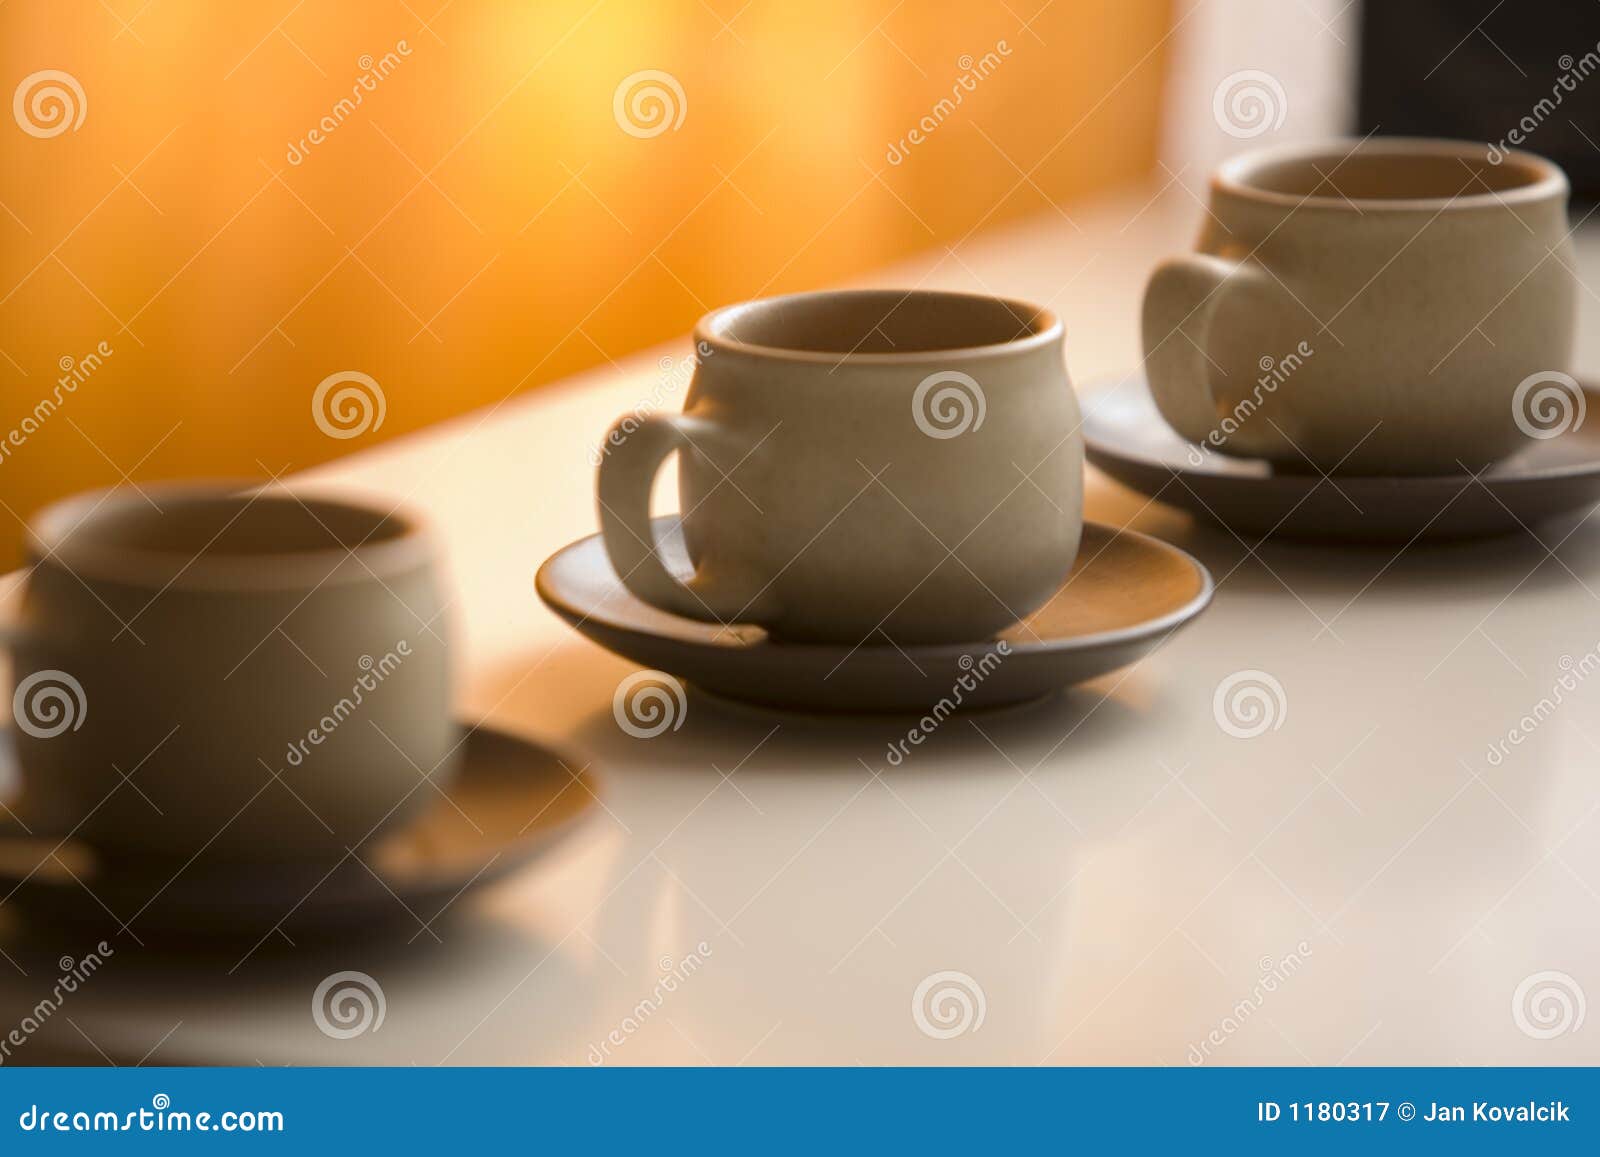 three coffee cups and saucers